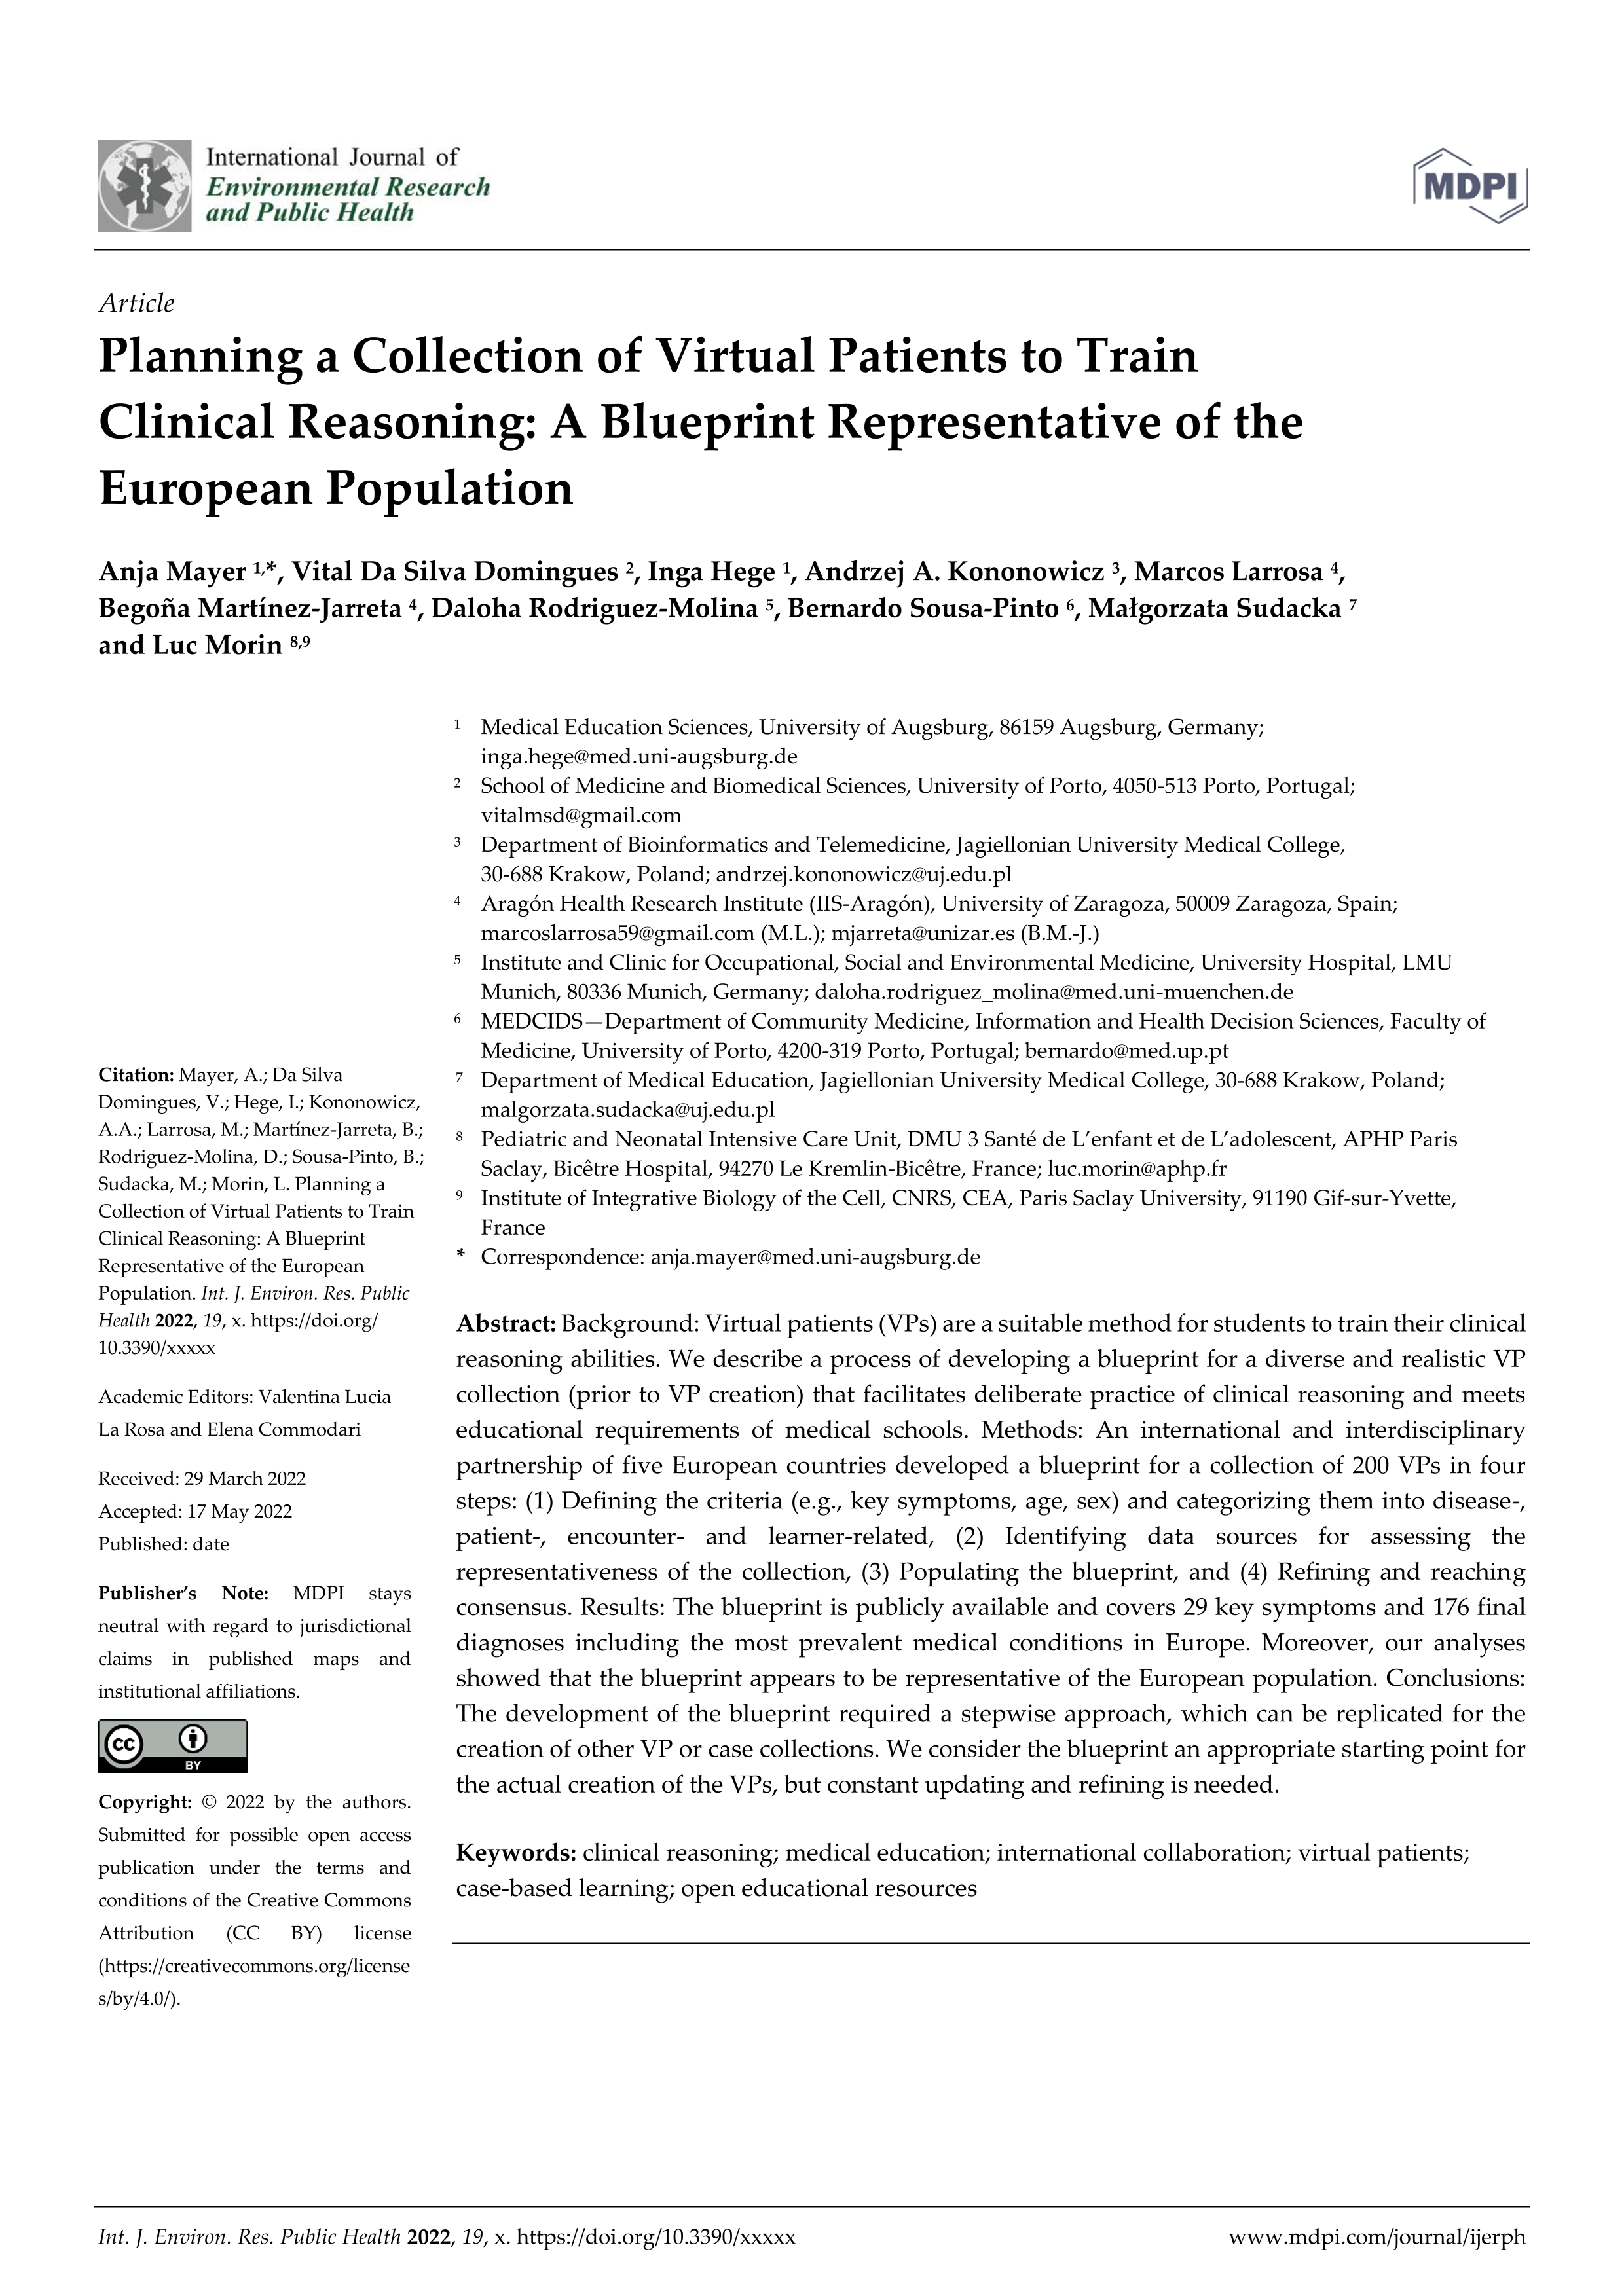 Planning a collection of virtual patients to train clinical reasoning: a blueprint representative of the European population